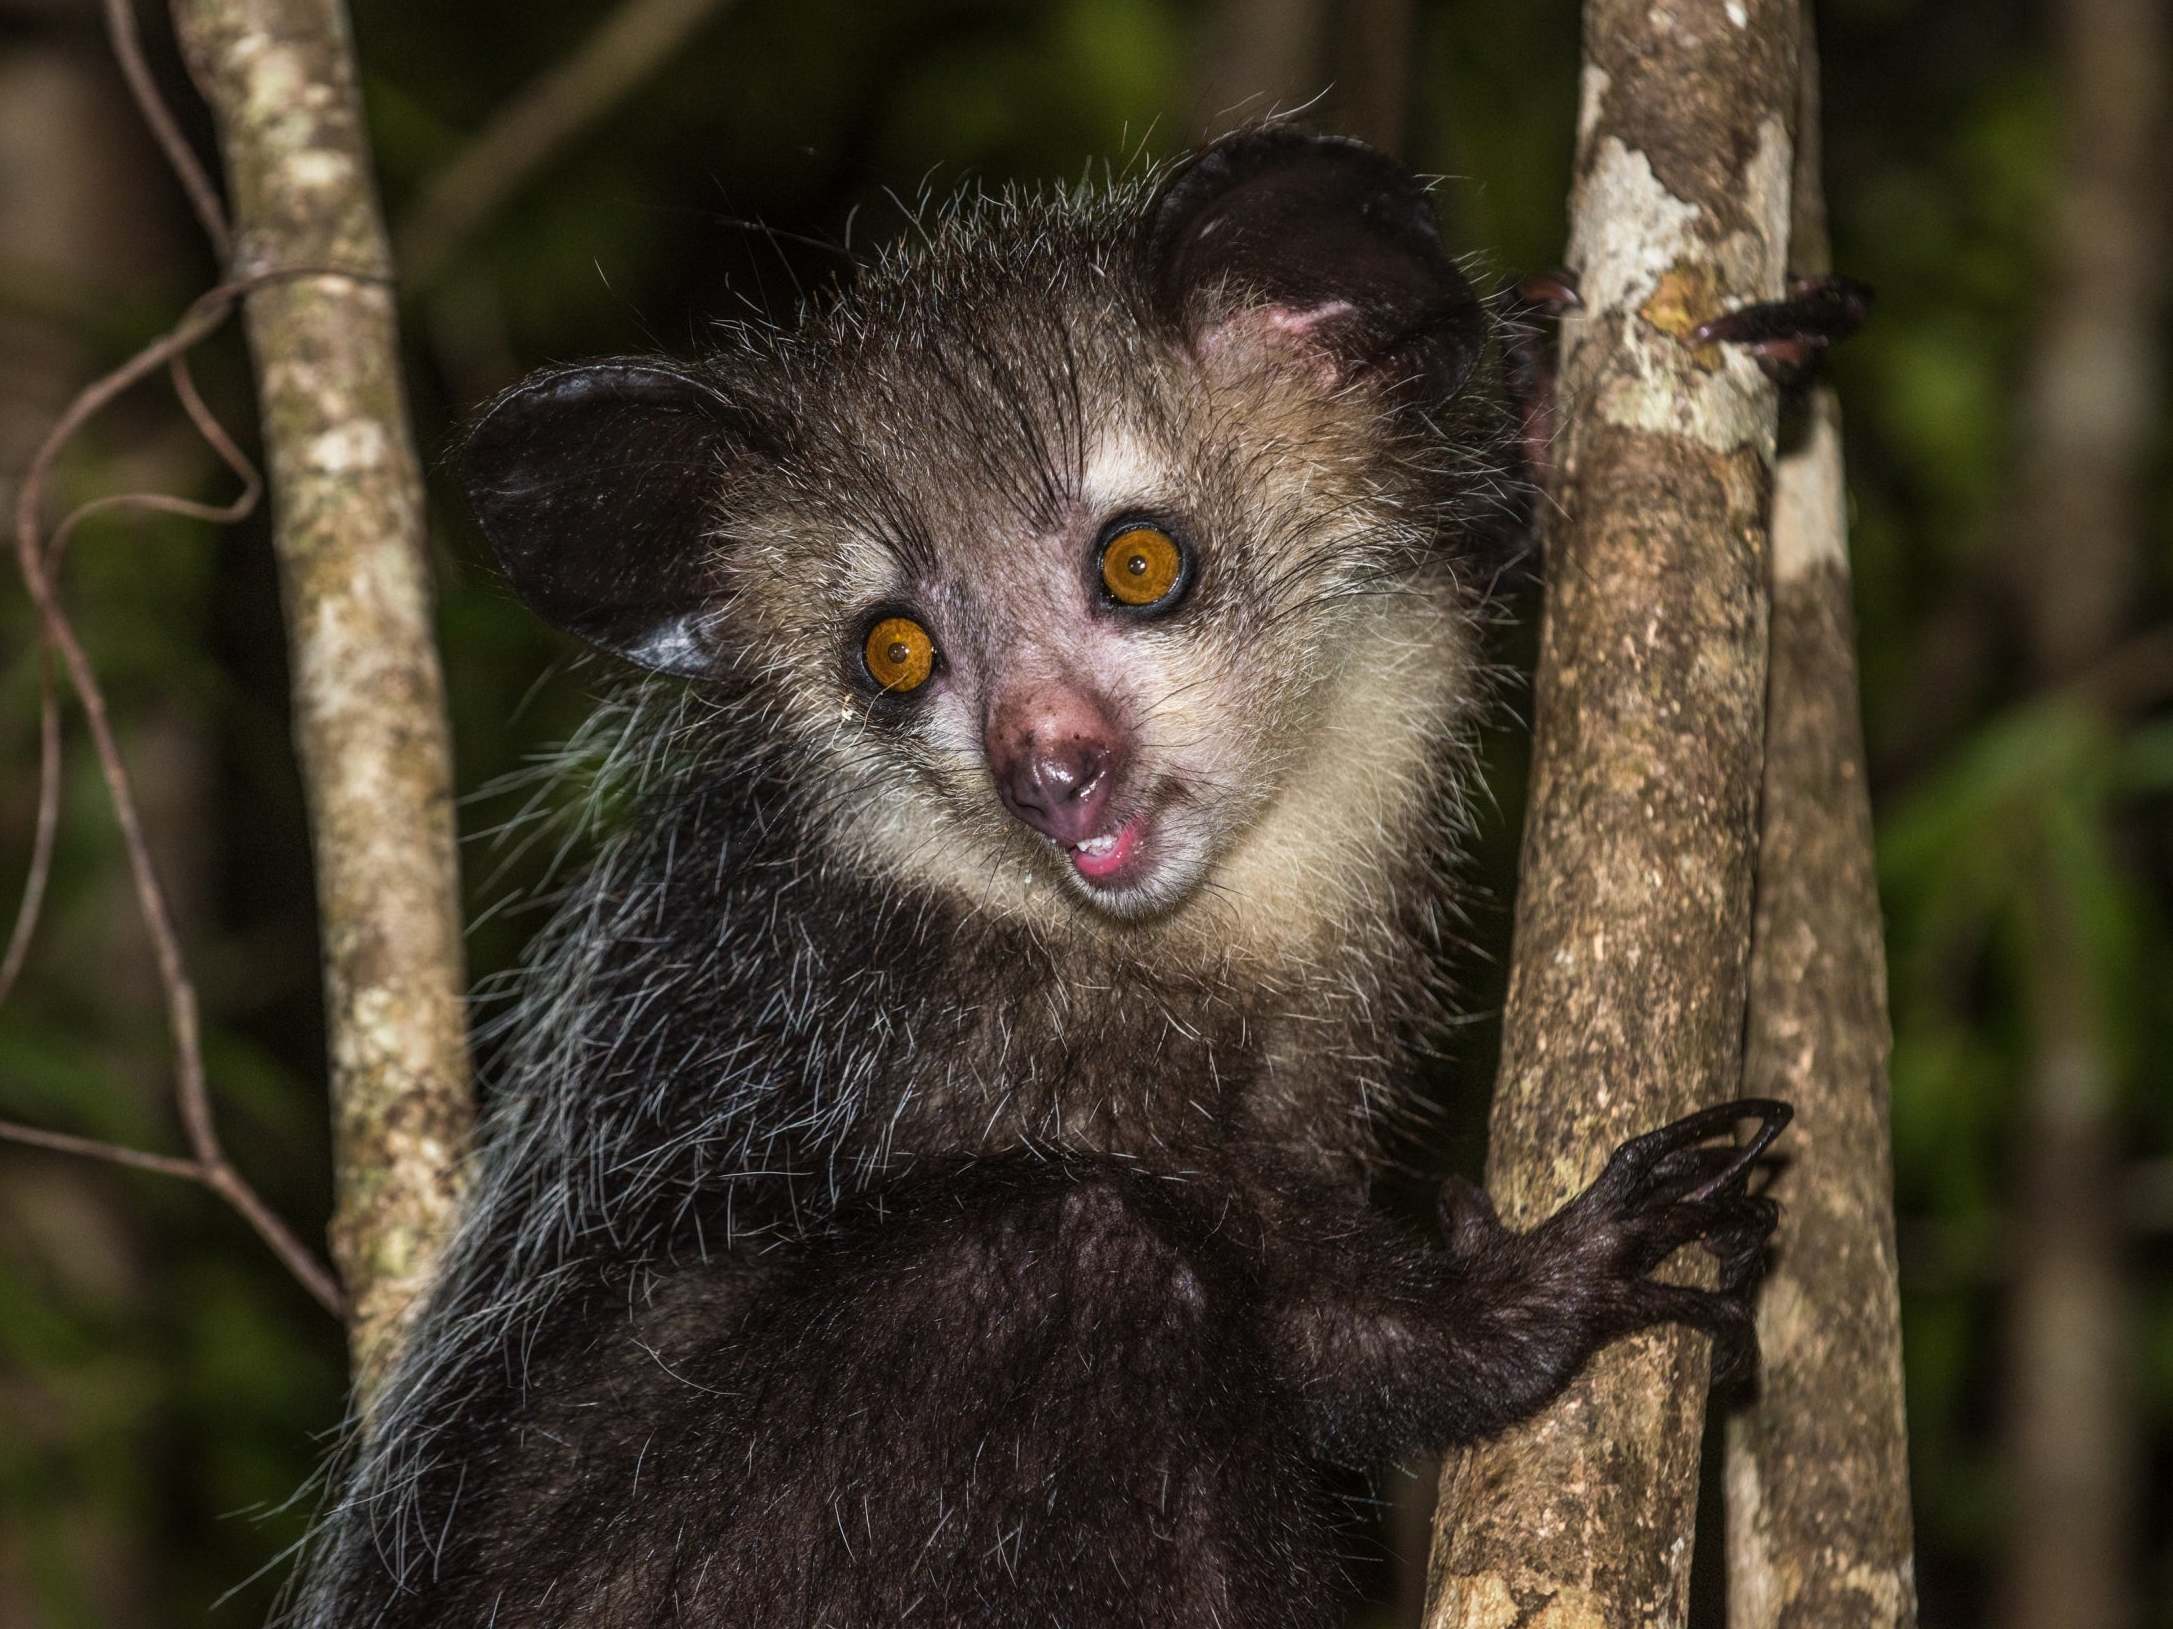 The aye-aye is a nocturnal lemur of Madagascar